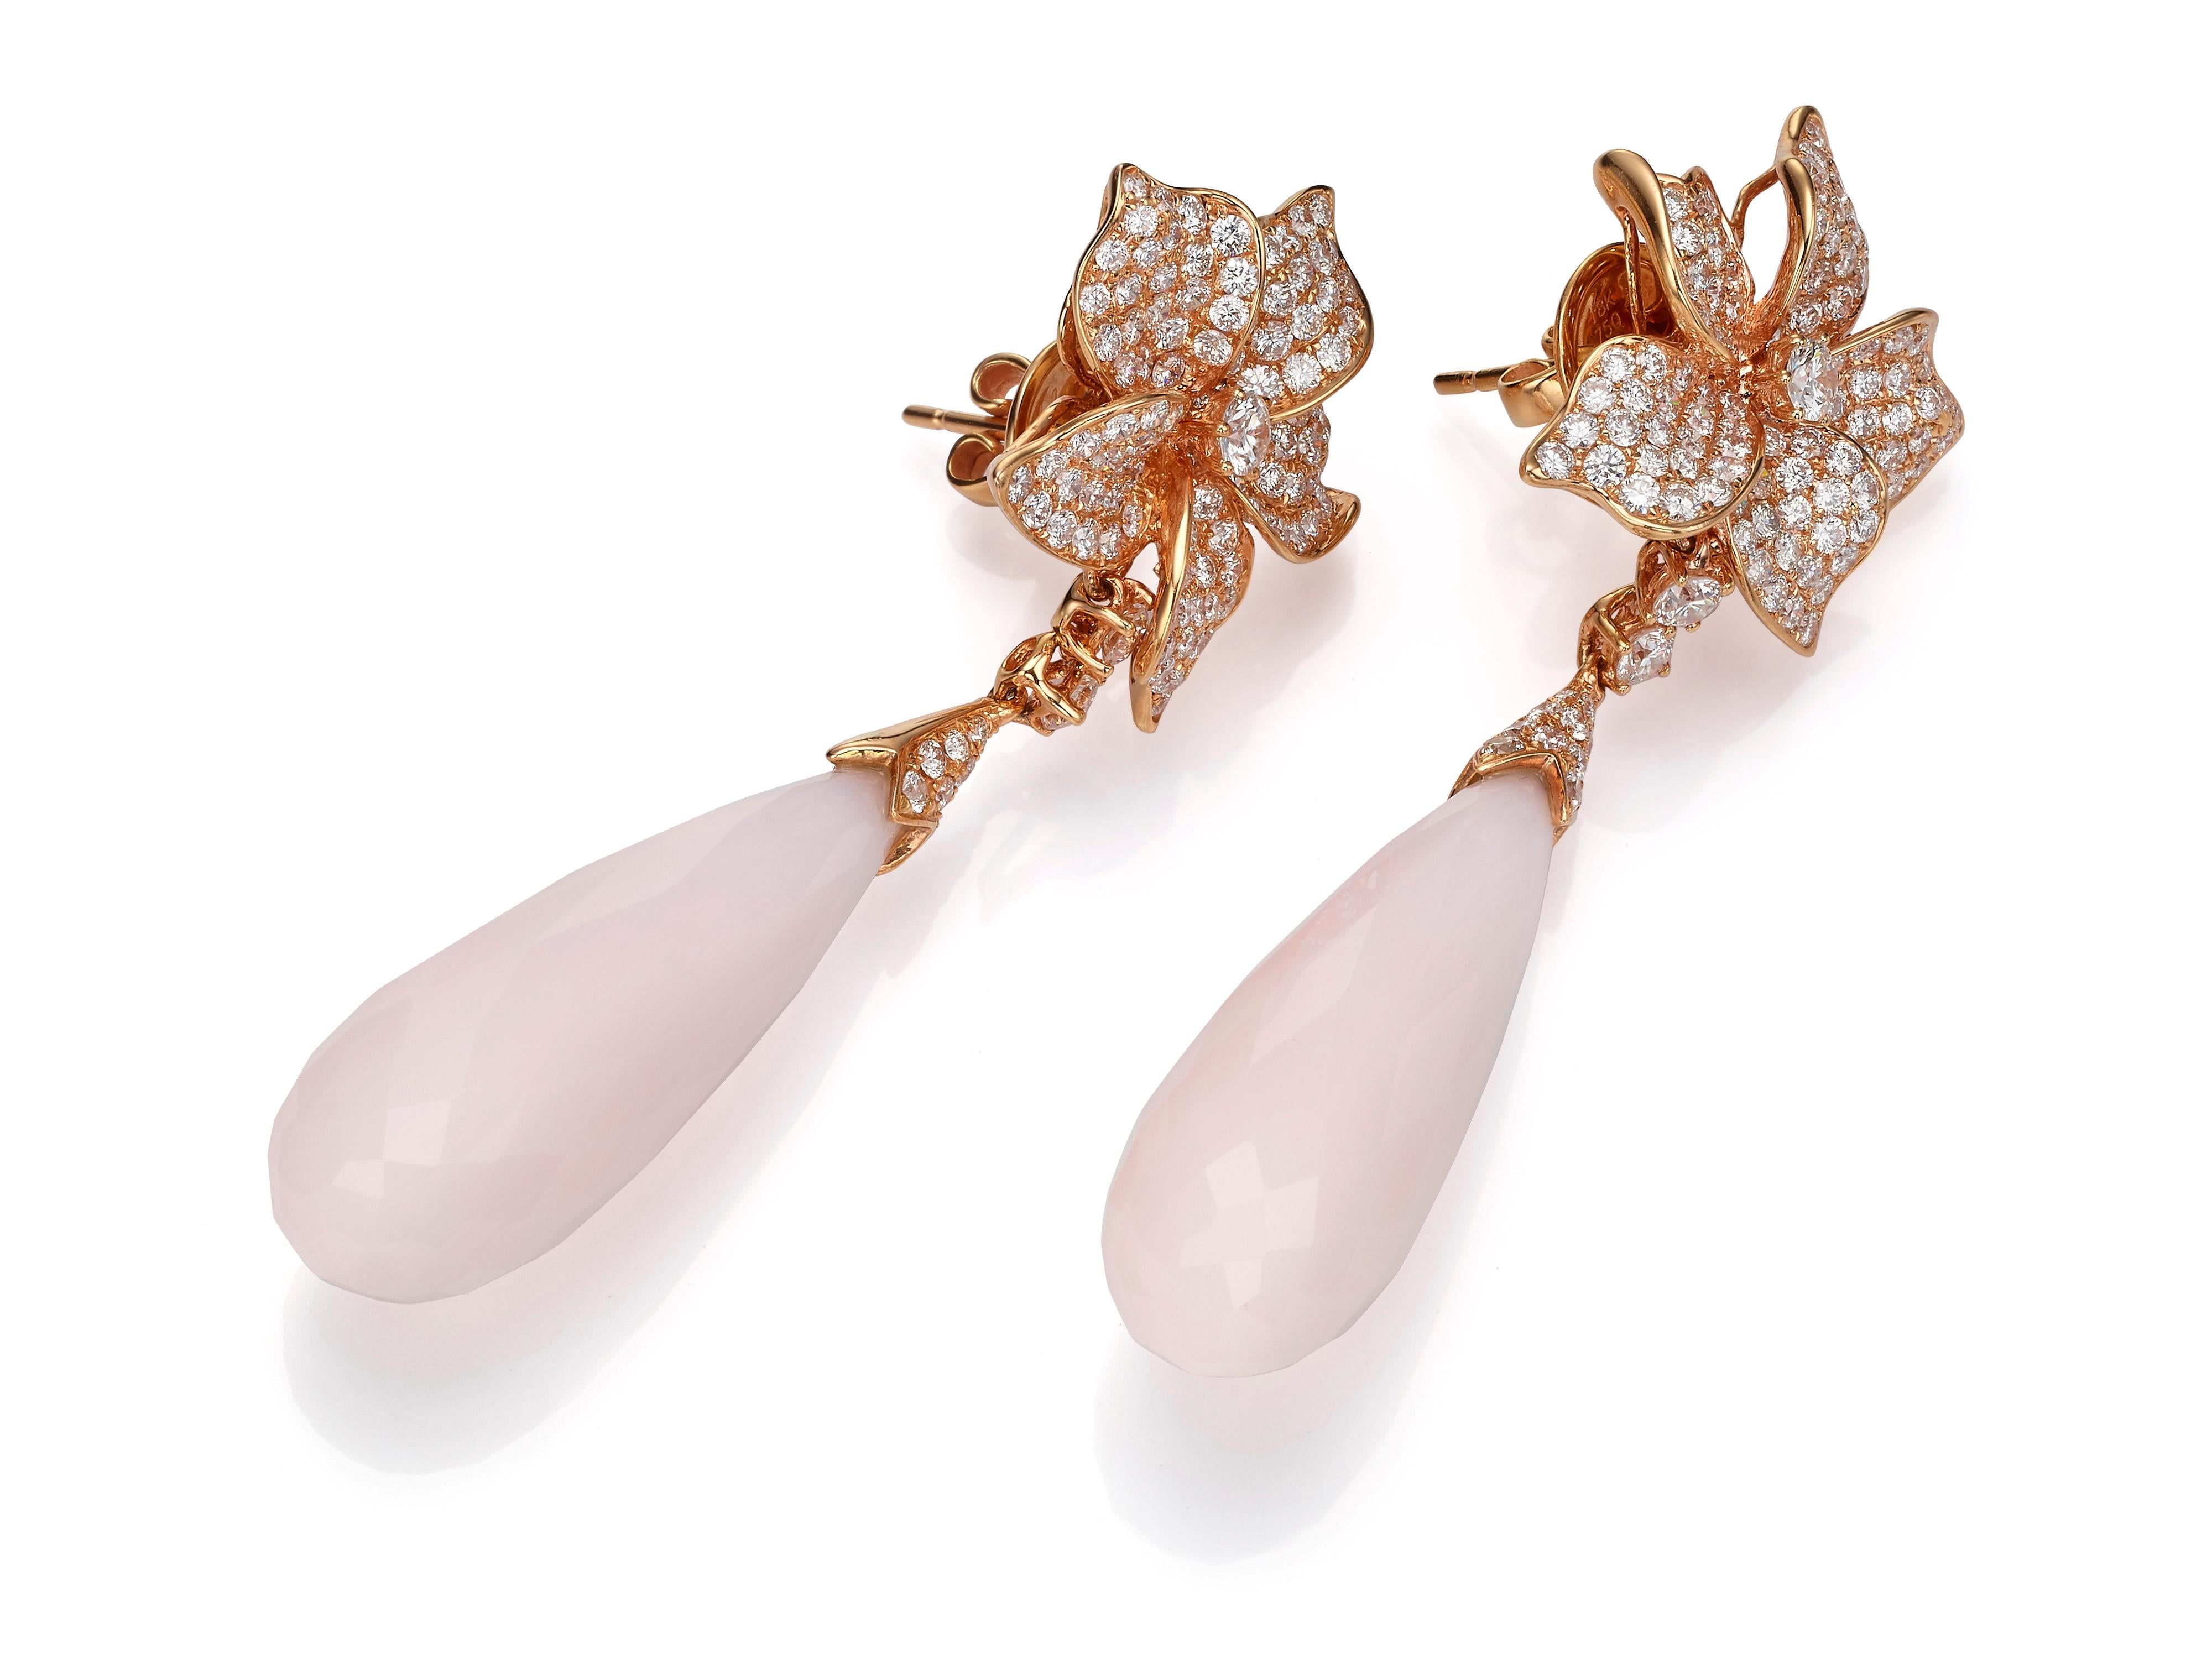 Crafted from 18K rose gold, these floral earrings are encrusted with 4.01 carats of shimmering white diamonds and tipped with two pink opals (totaling 38.05 carats) that move freely.

Composition: 
18K Rose Gold
246 Round Diamonds: 4.01 carats
2